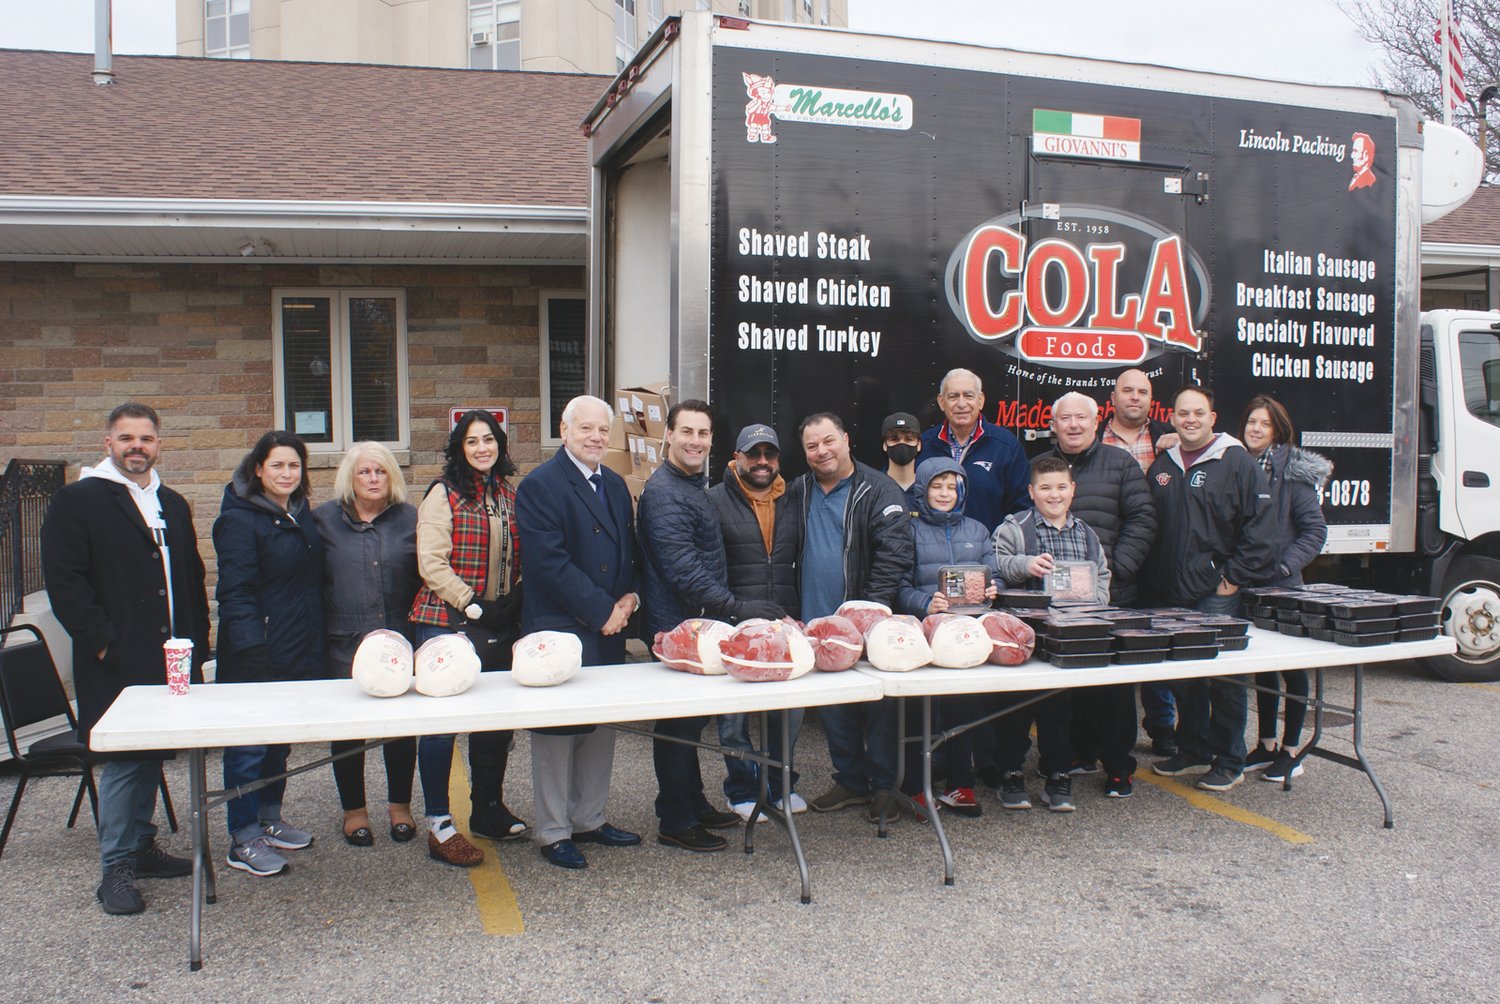 IT TAKES A VILLAGE: Standing in front of the Cola Foods truck were the many volunteers involved in the Free Turkey Giveaway. Cola Foods donated the sausage meat.